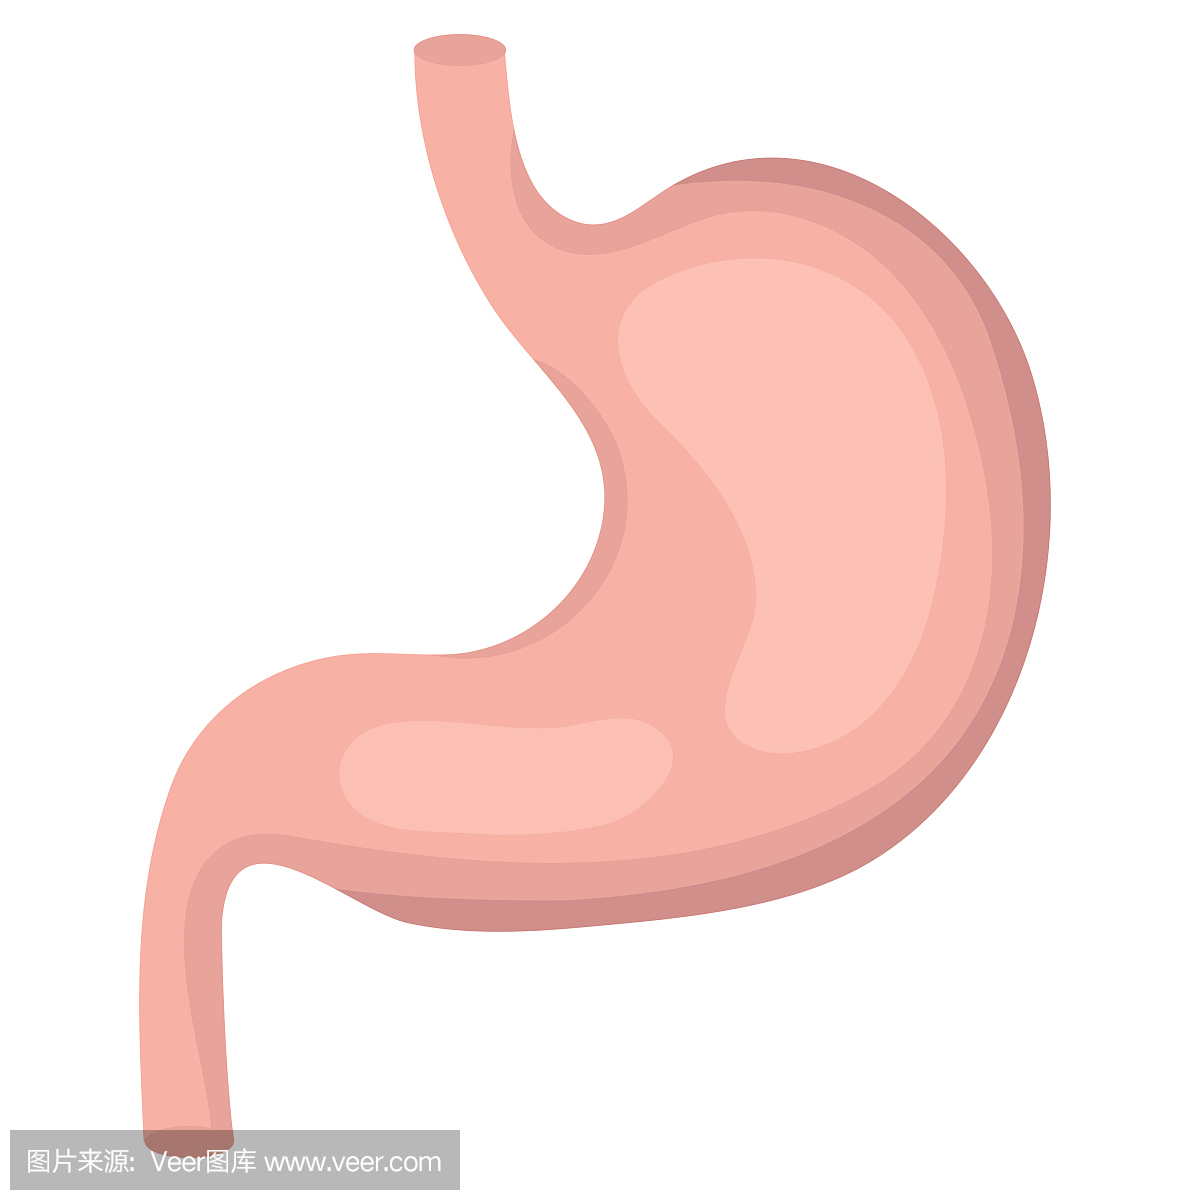 Stomach icon, flat style. Internal organs of the h